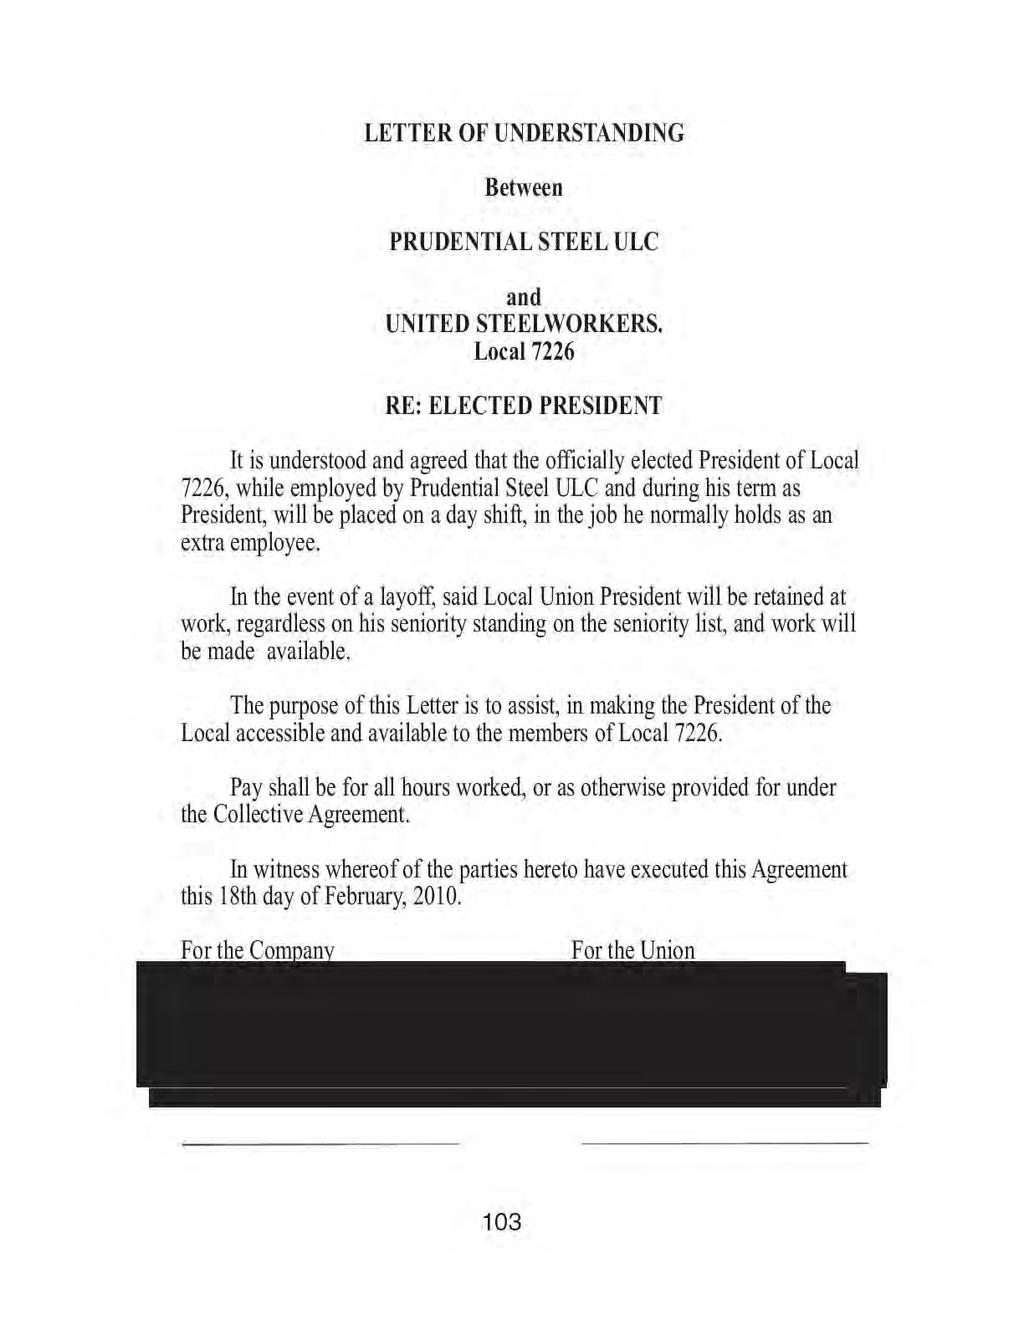 LETTER OF UNDERSTANDING Between PRUDENTIAL STEEL ULC and UNITED STEELWORKERS.